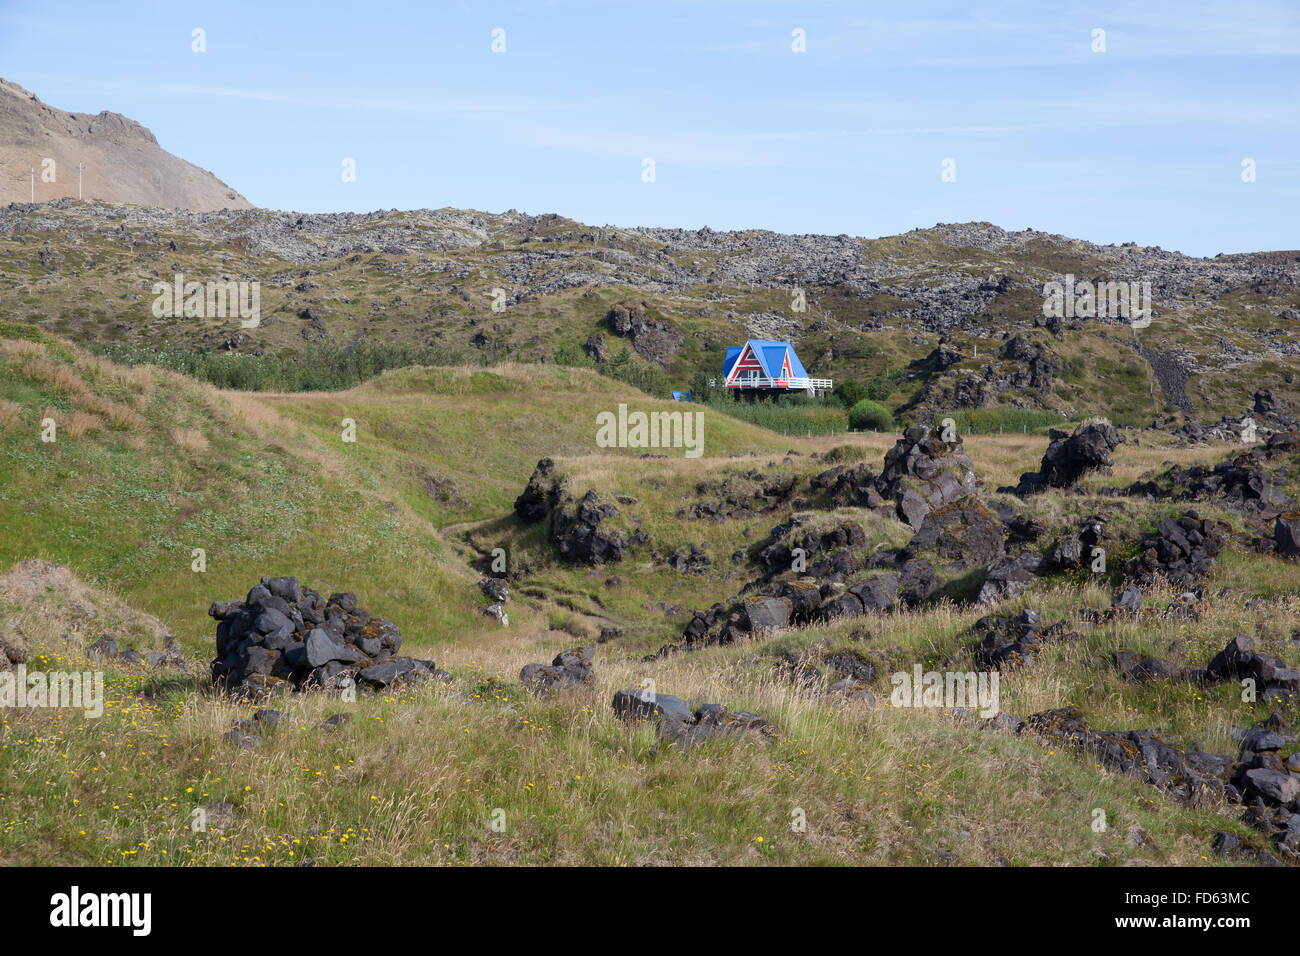 House In Remote Area Stock Photo